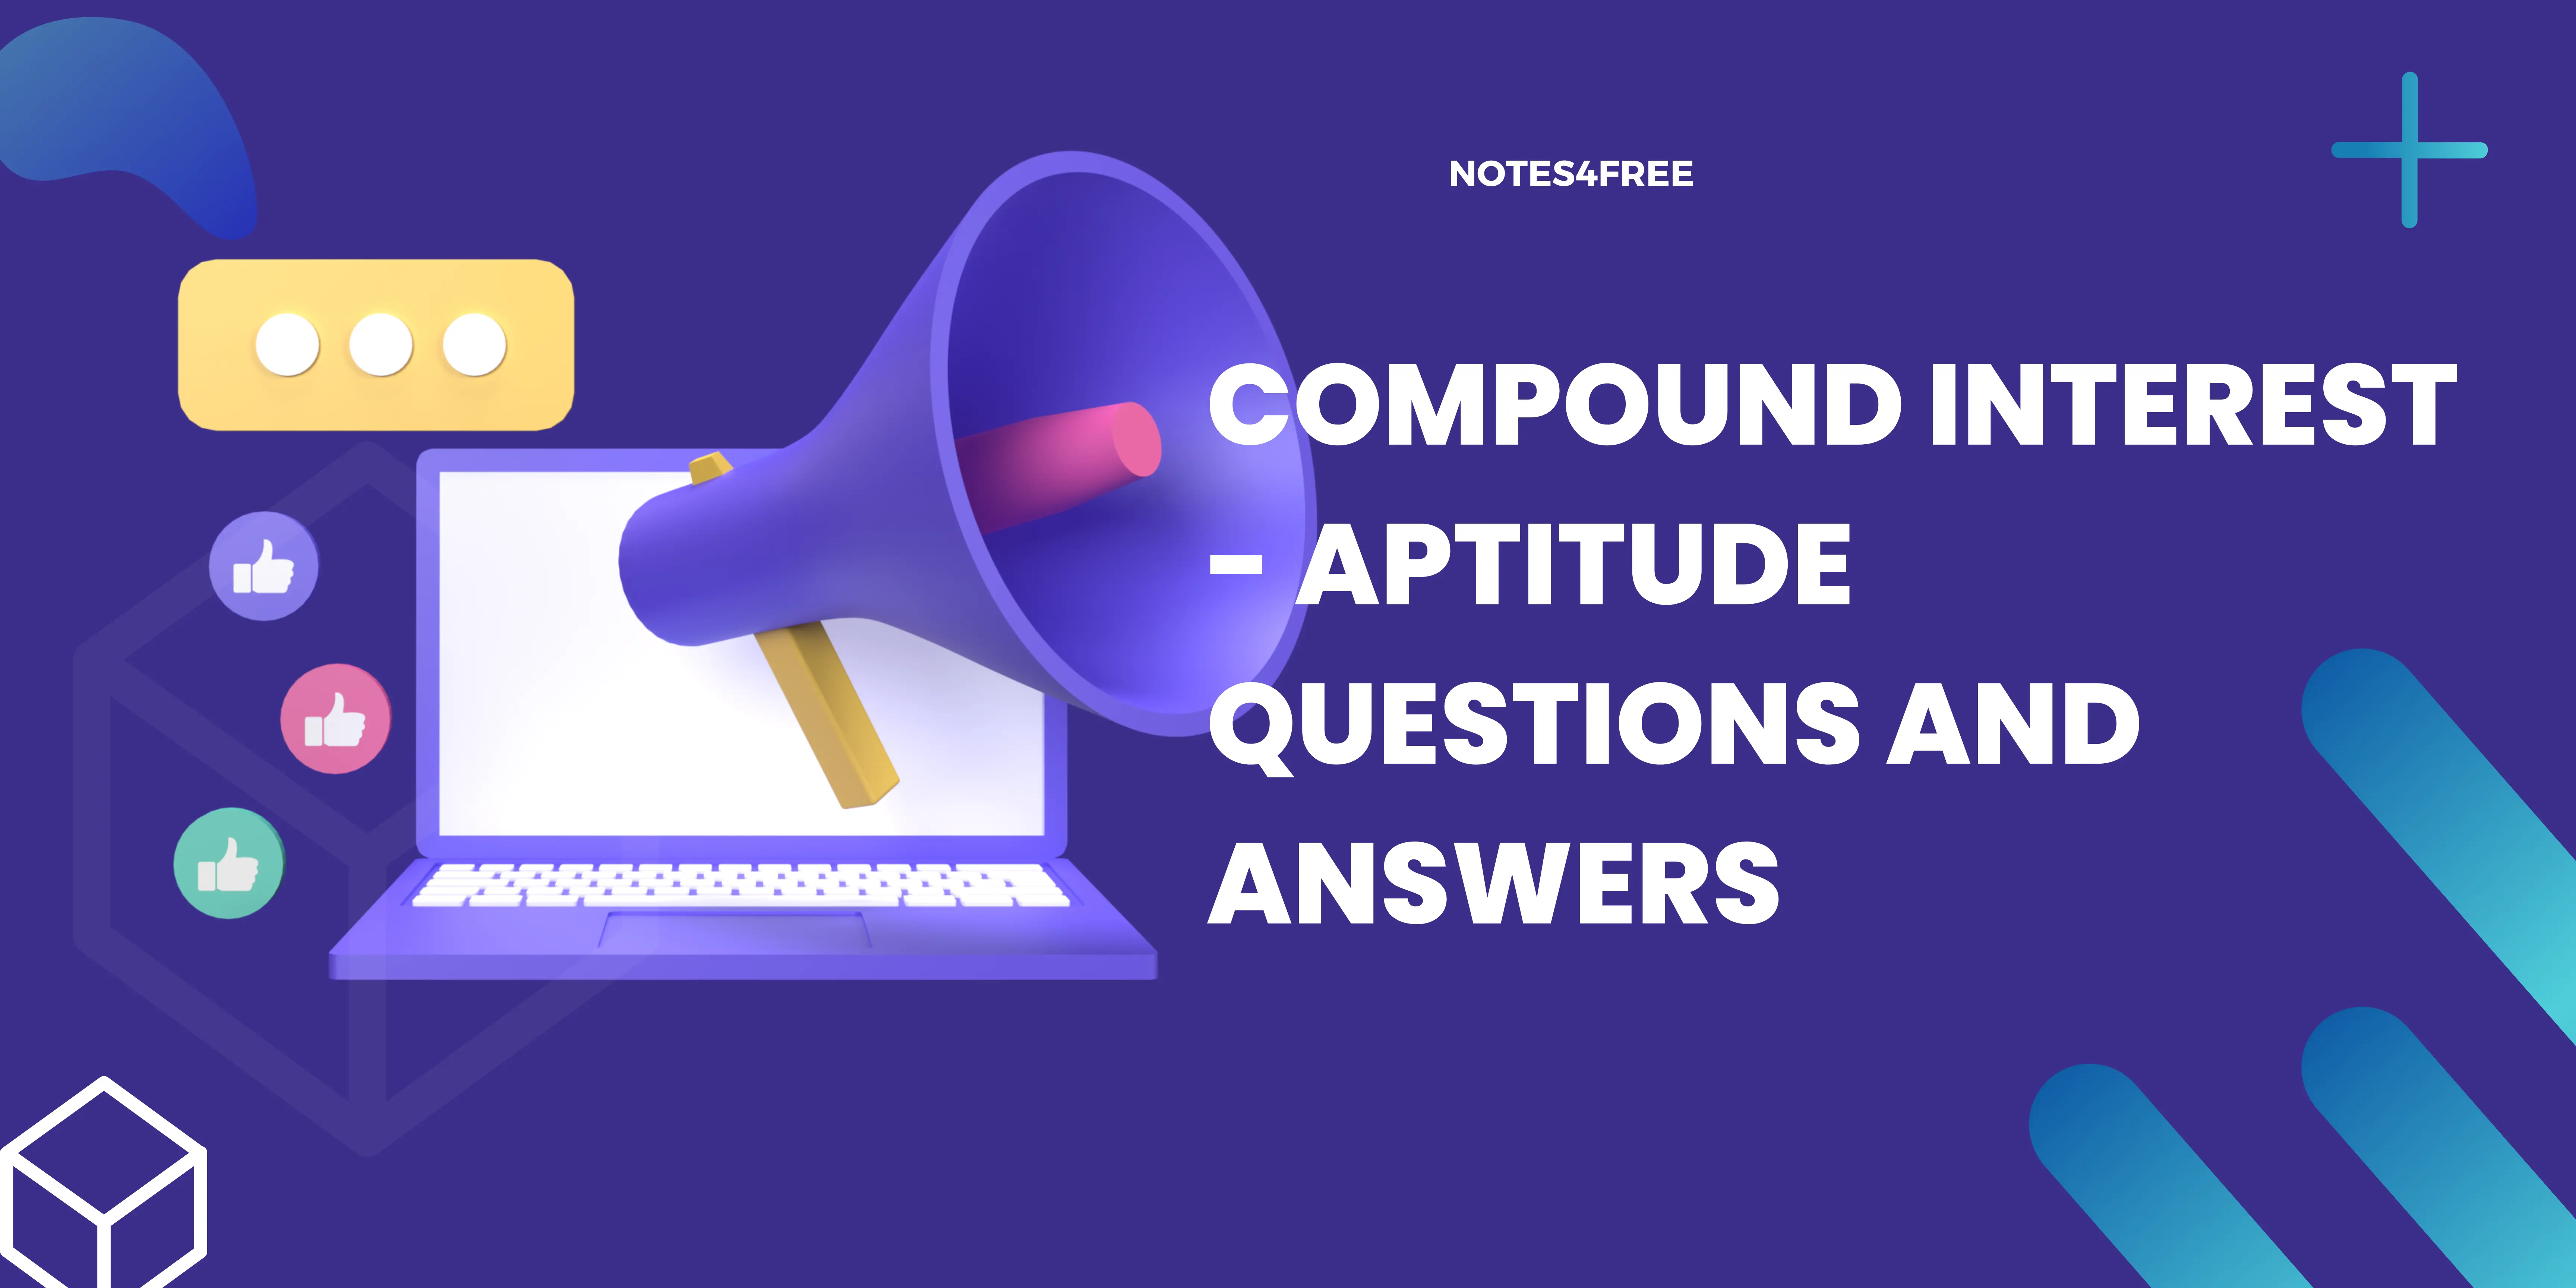 Compound Interest - Aptitude Questions and Answers